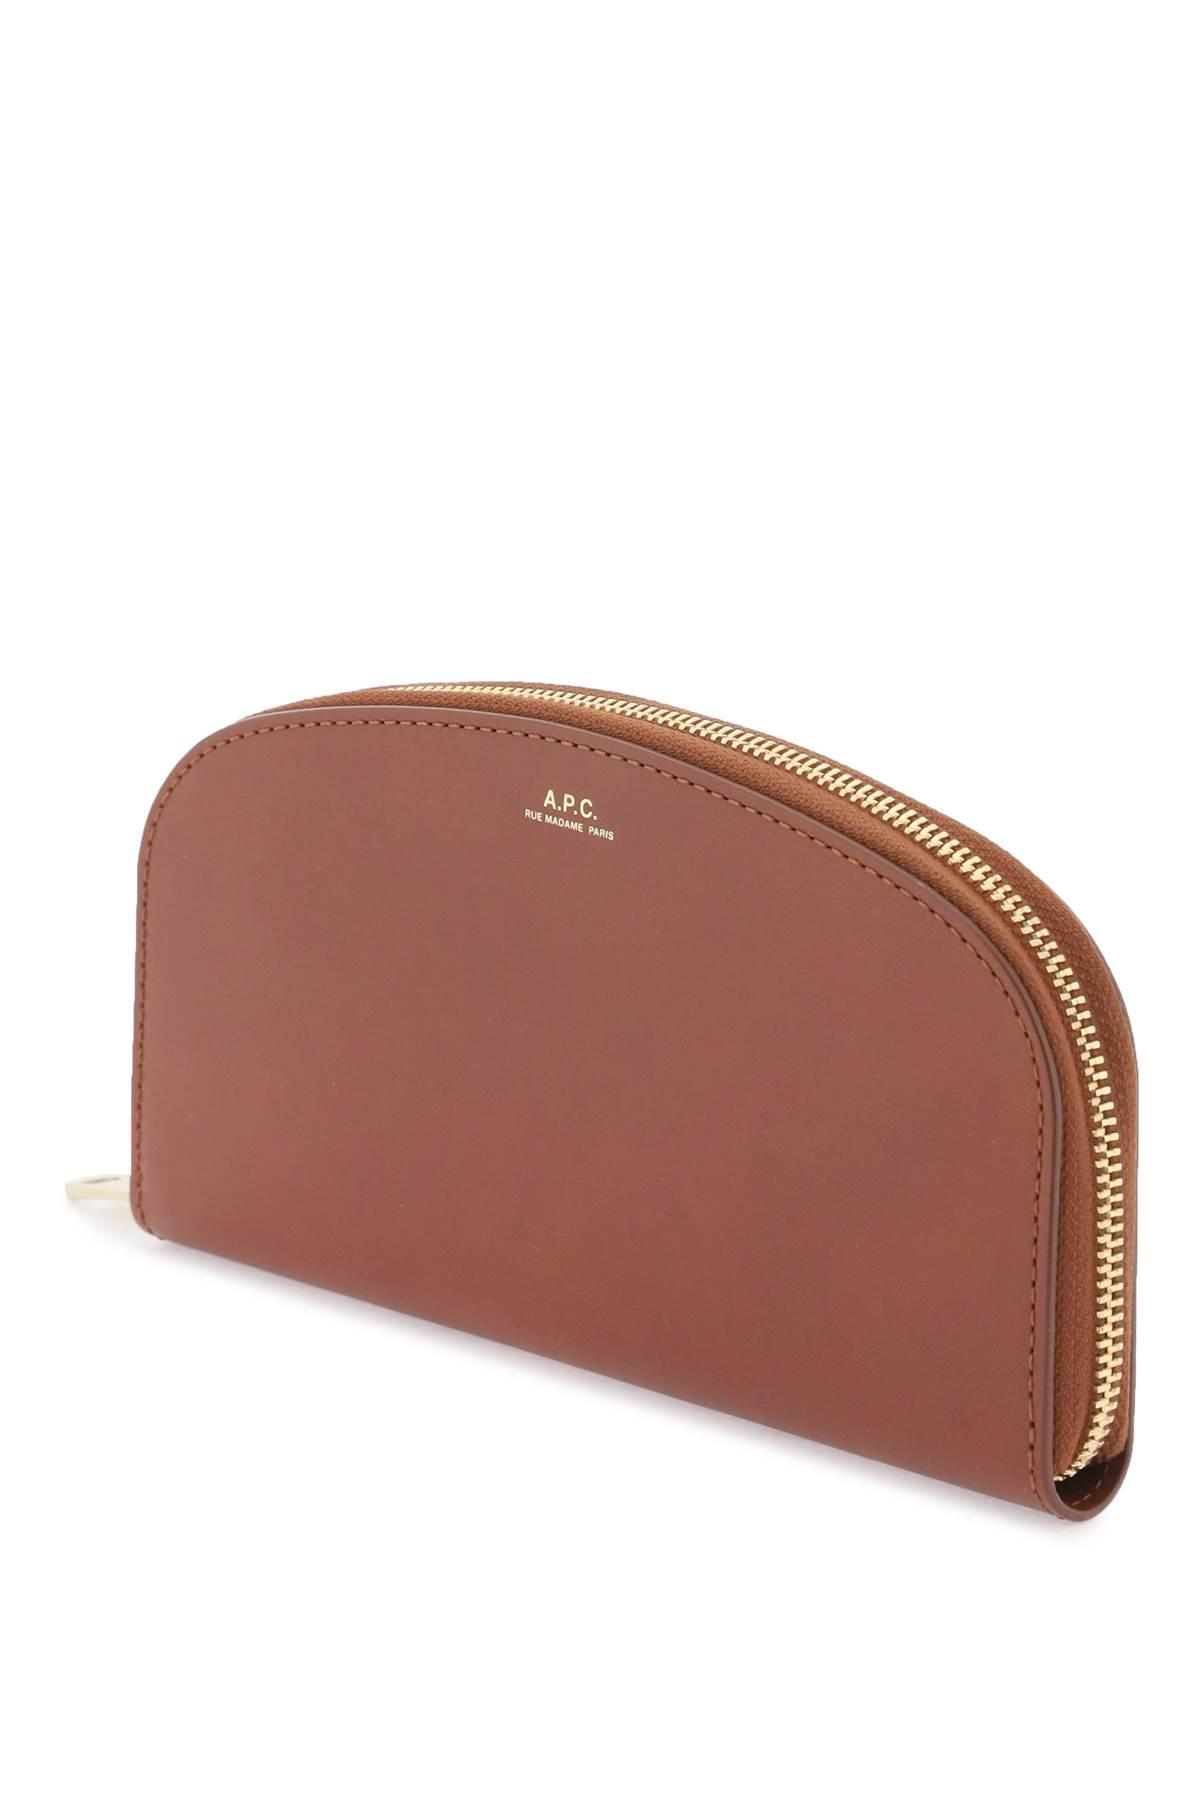 A.P.C. Demi Lune Wallet in Brown | Lyst